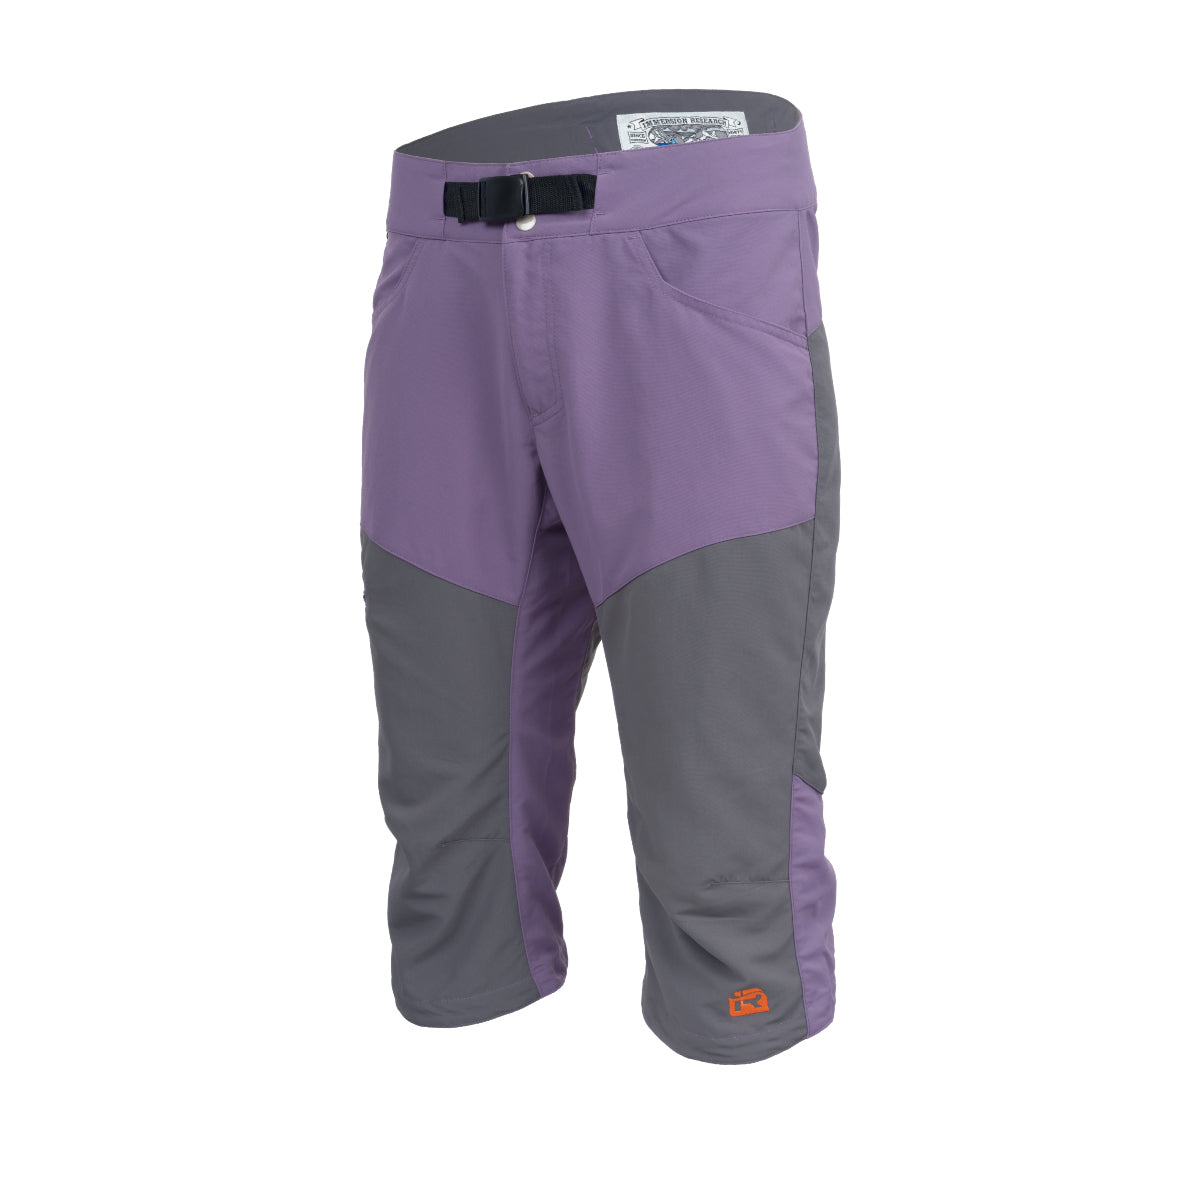 Immersion Research Shinzer Shorts